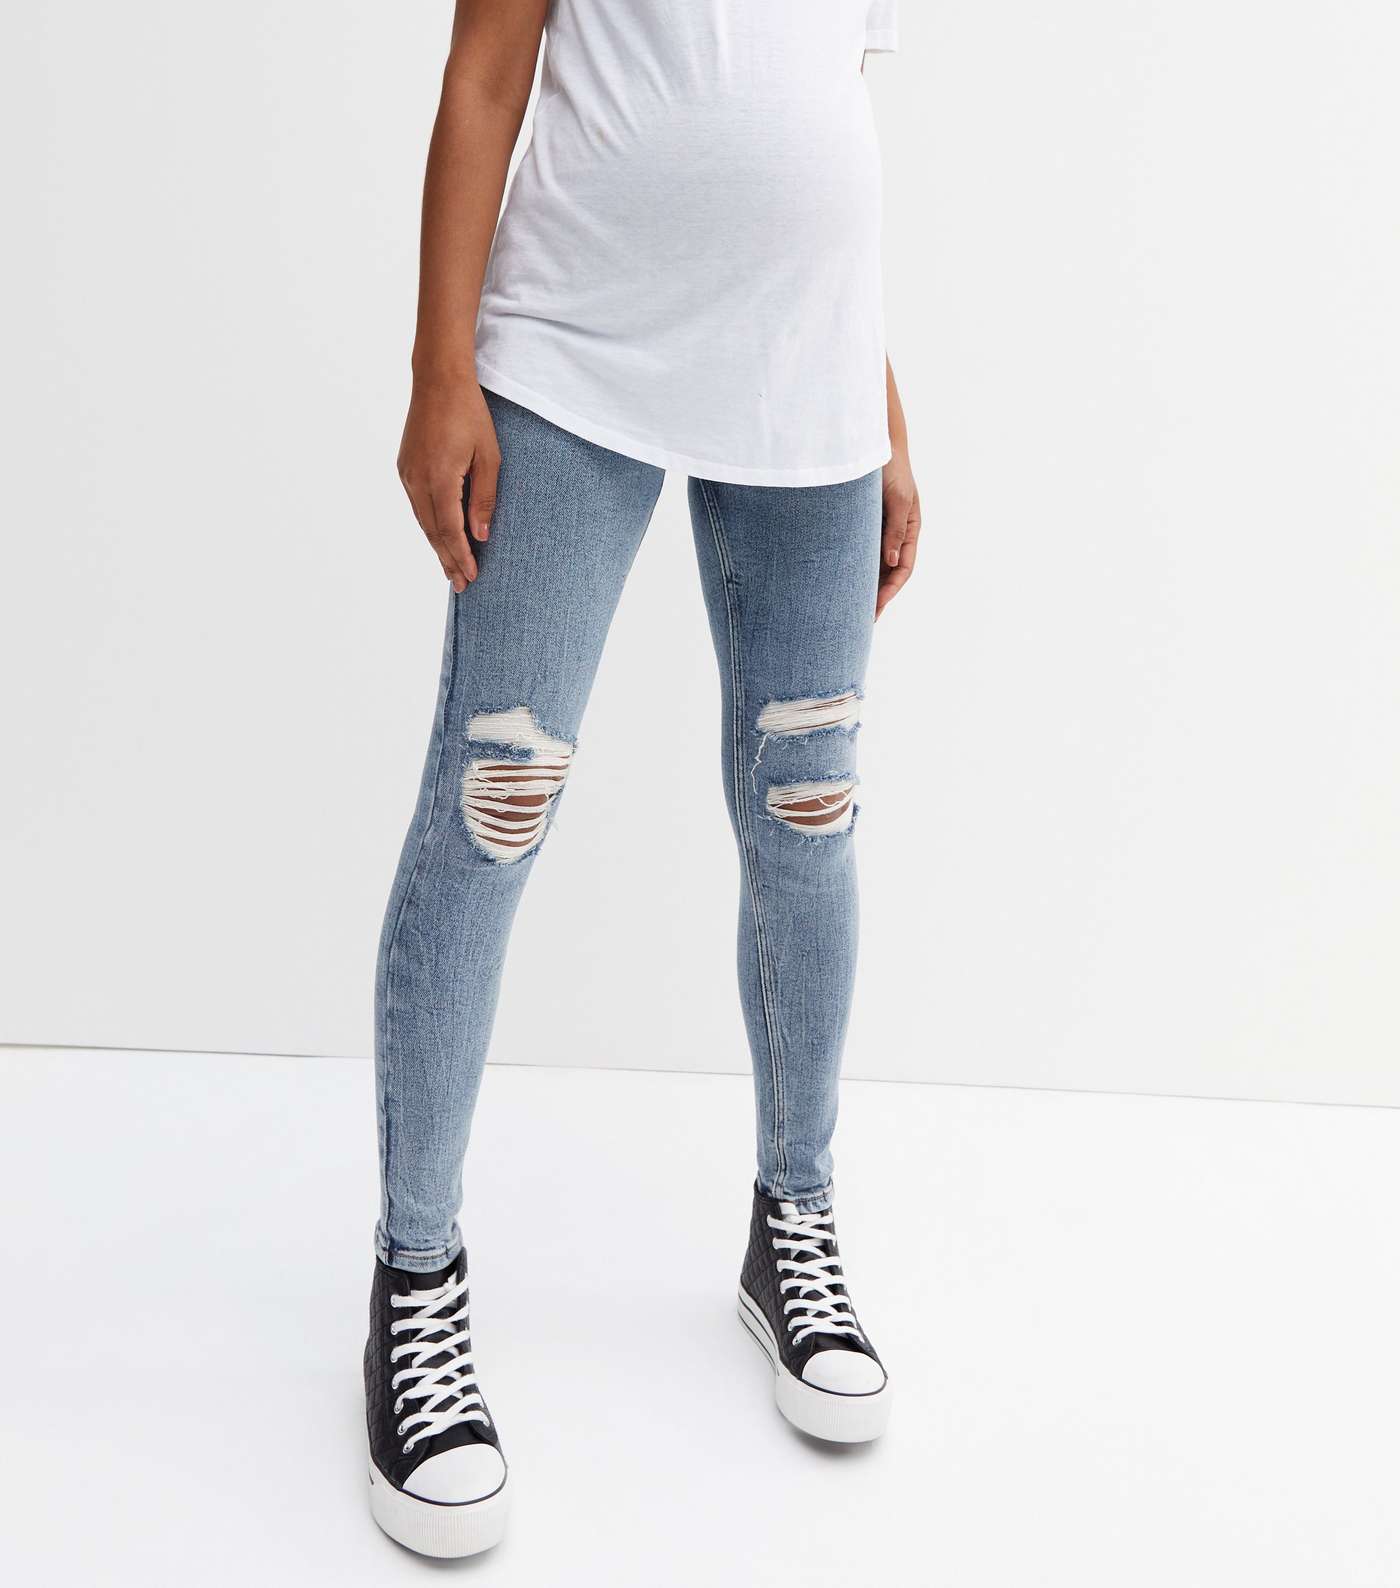 Curves Maternity Teal Ripped Over Bump Hallie Super Skinny Jeans Image 2